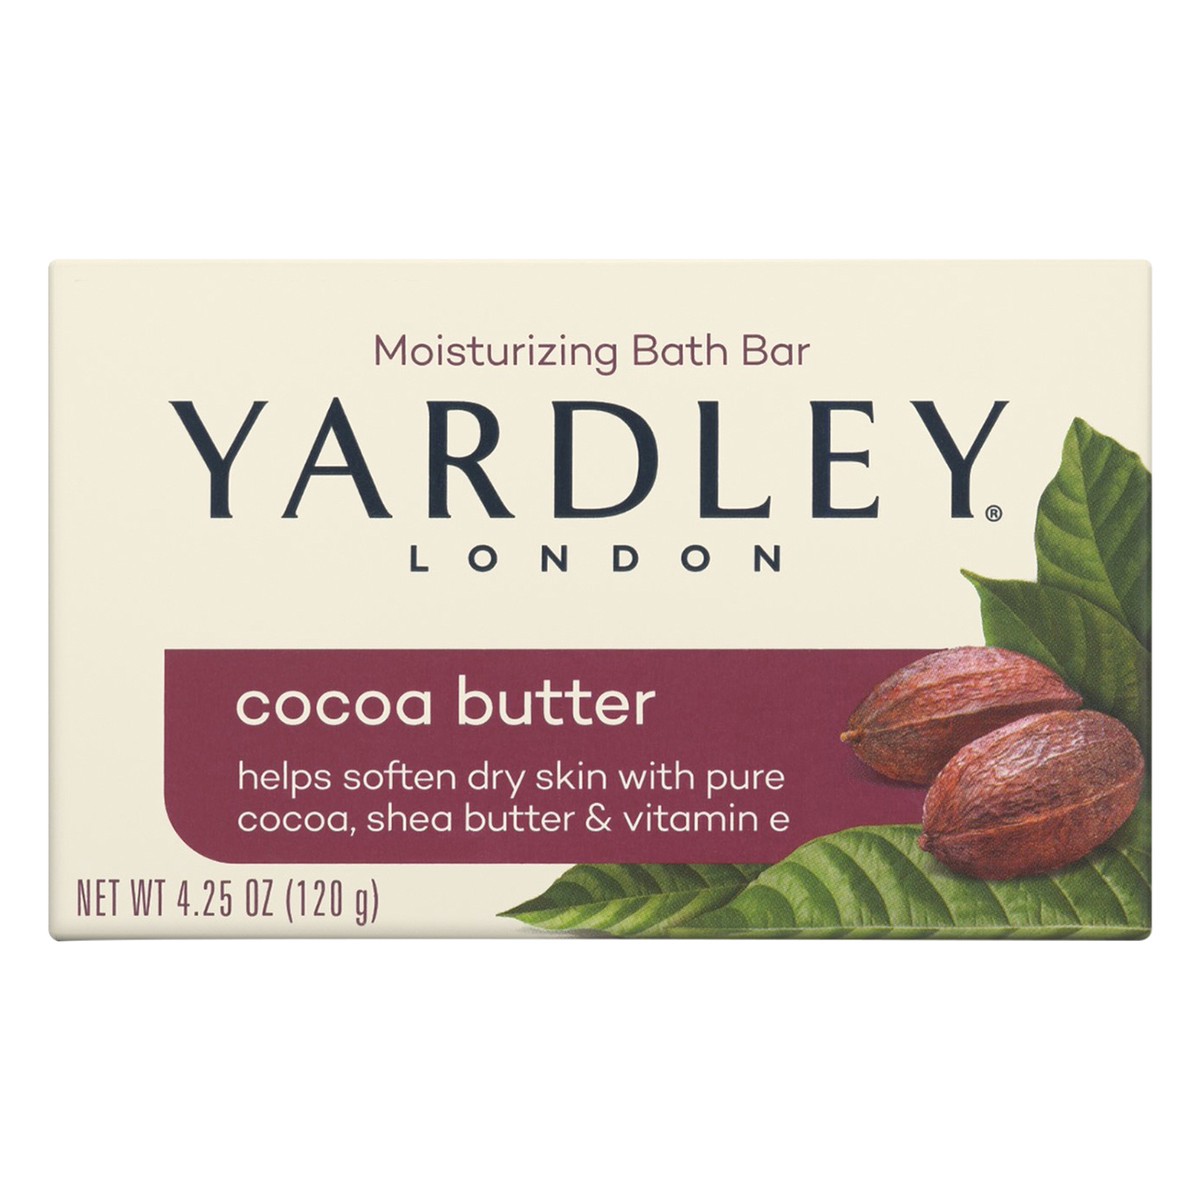 slide 11 of 11, Yardley London Nourishing Bath Soap Bar Cocoa Butter, Helps Soften Dry Skin with Pure Cocoa Butter, Shea Butter & Vitamin E, 4.0 oz Bath Bar, 1 Soap Bar, 4 oz